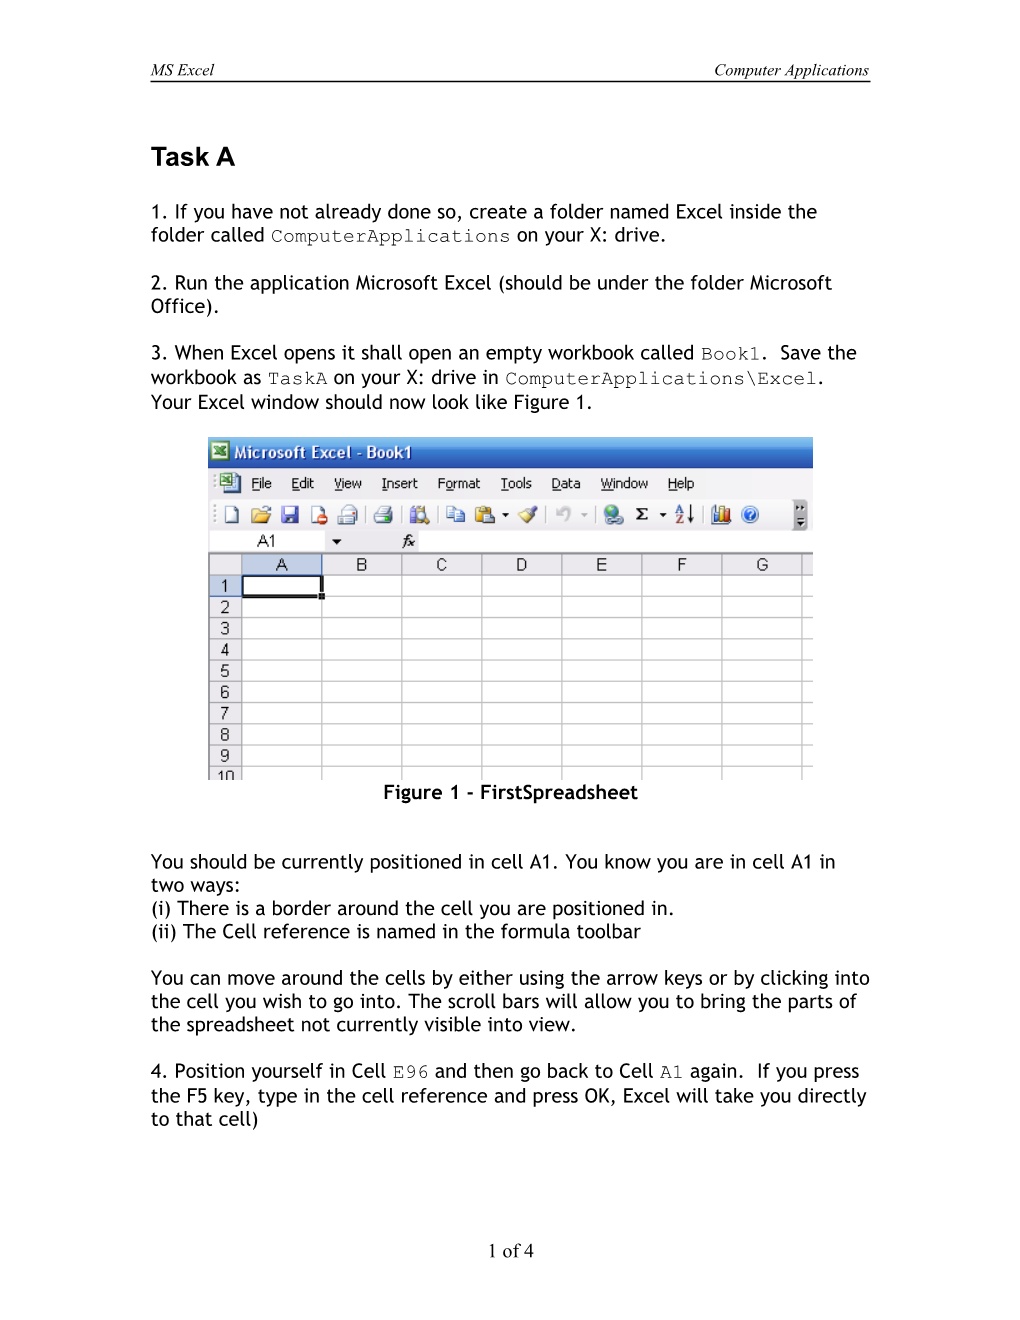 2. Run the Application Microsoft Excel (Should Be Under the Folder Microsoft Office)